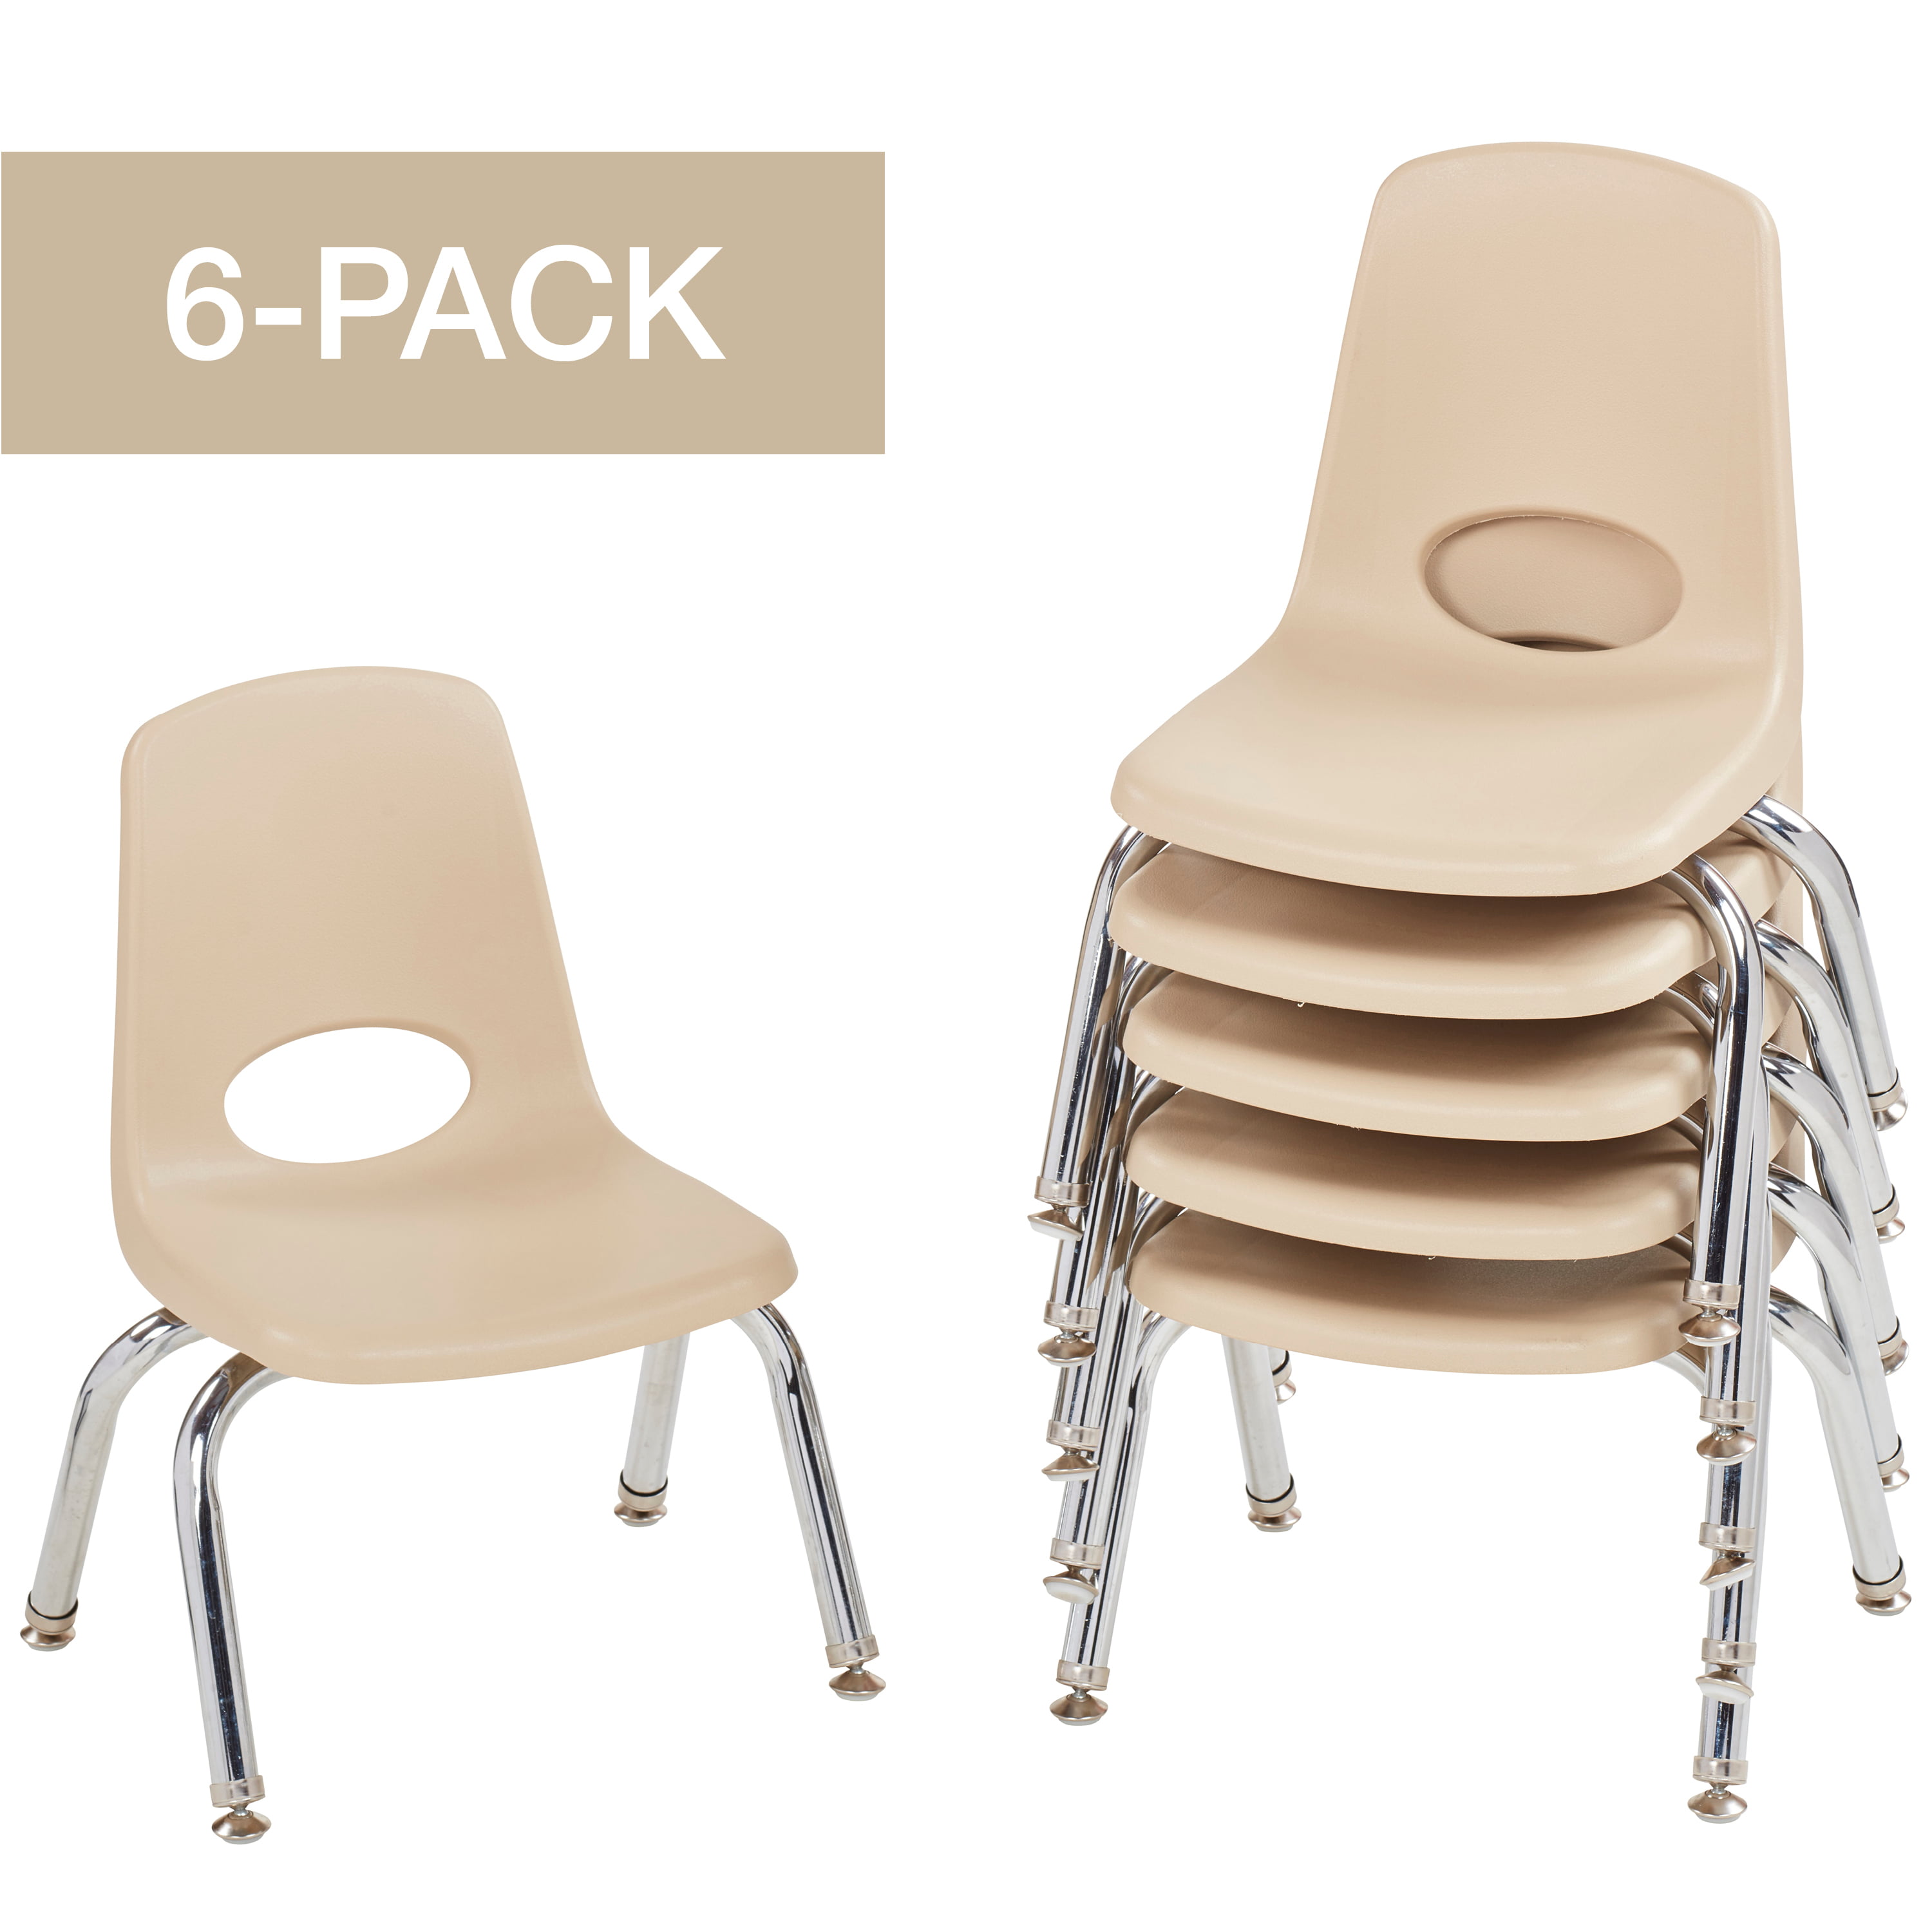 6 PACK 12''School Stack Chair w/Chrome Legs & Swivel Glides Sand Color 